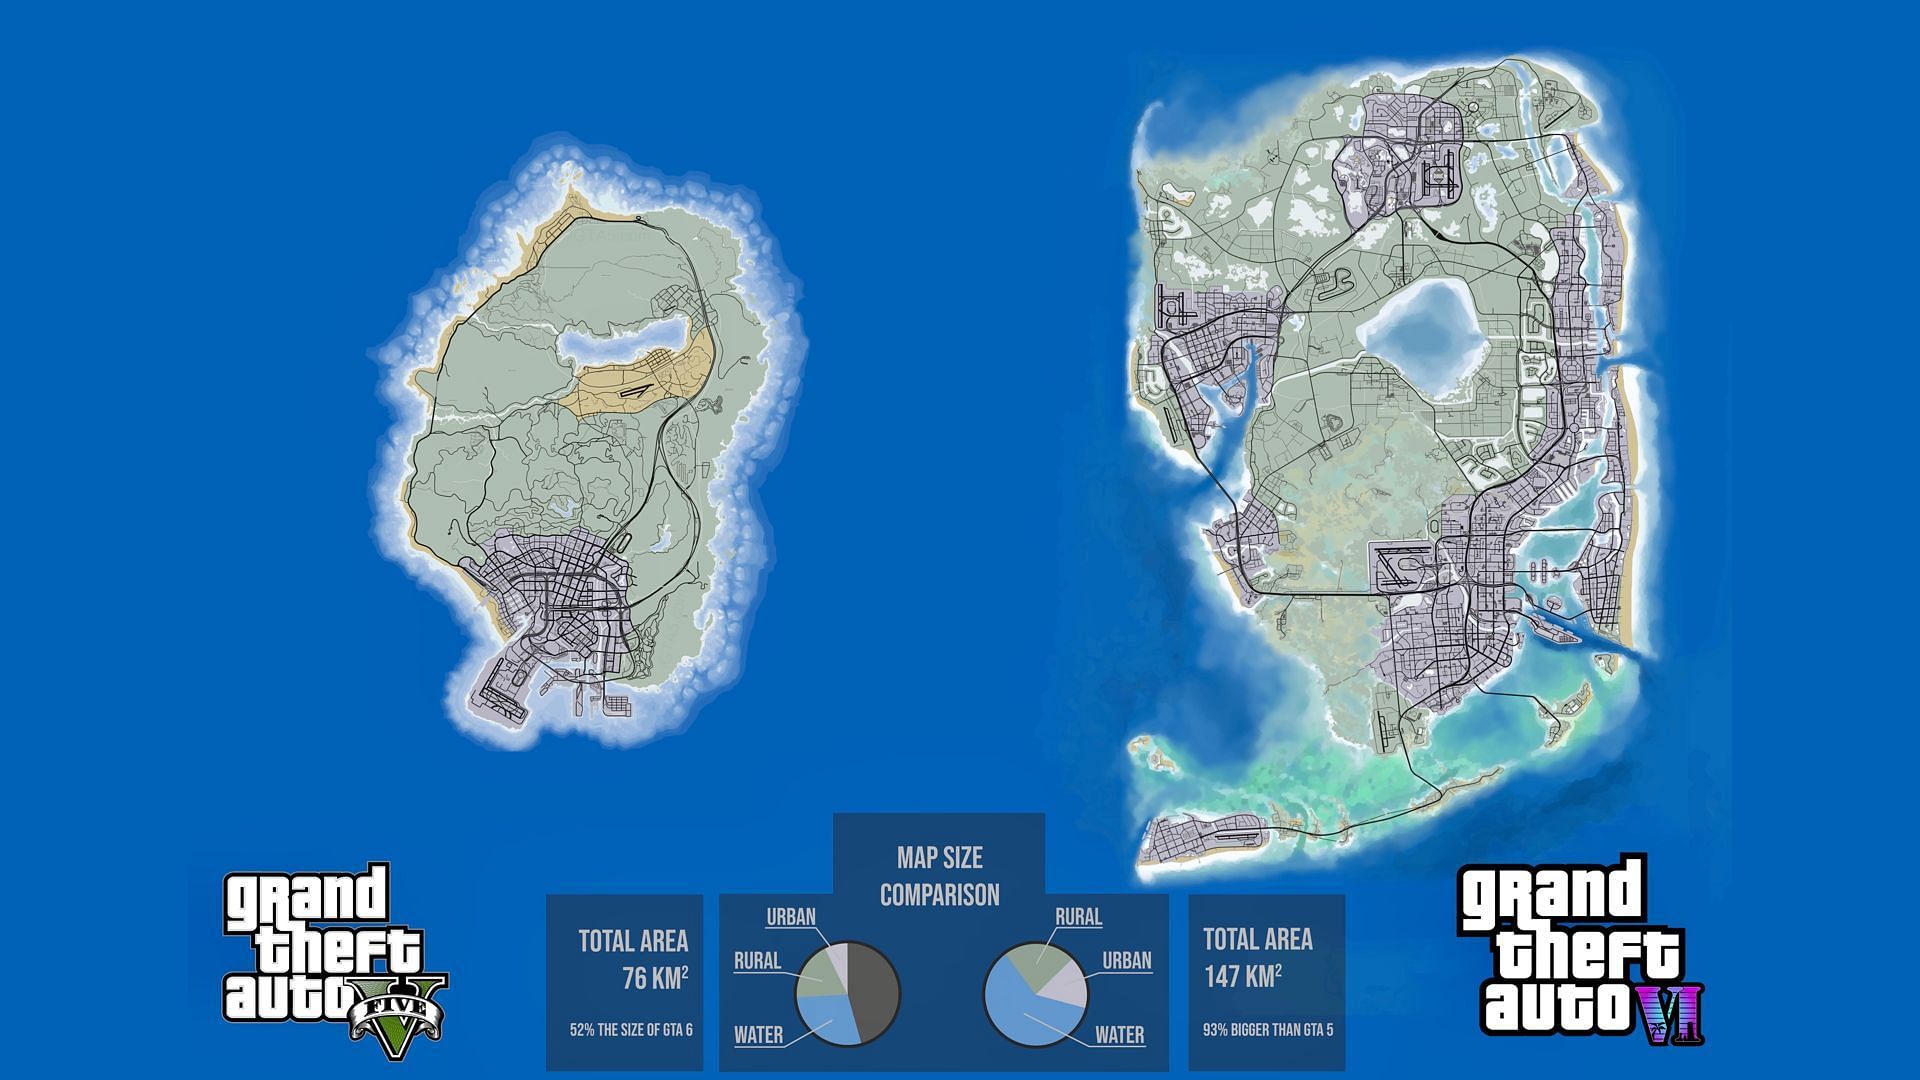 Gta Leaked Map Concepts Raise Expectations For The Real One